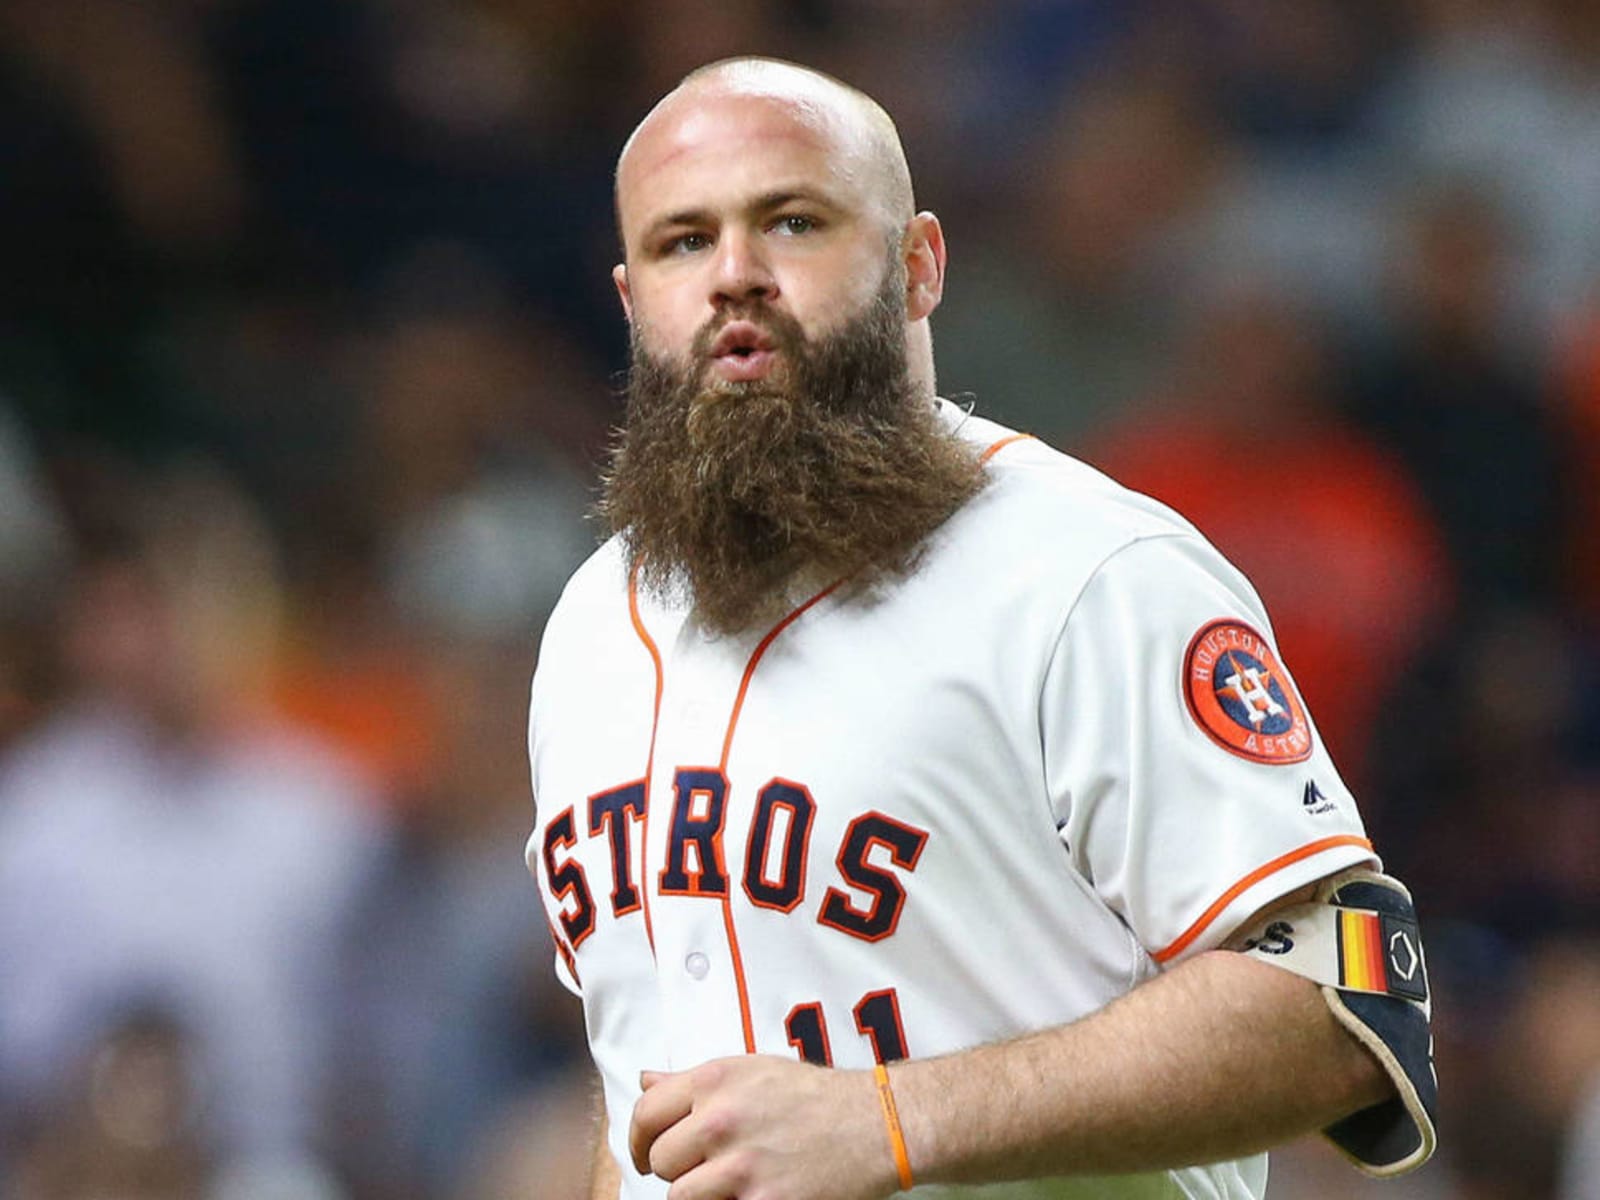 Evan Gattis says Astros players told Dodgers to cool it on cheating talk